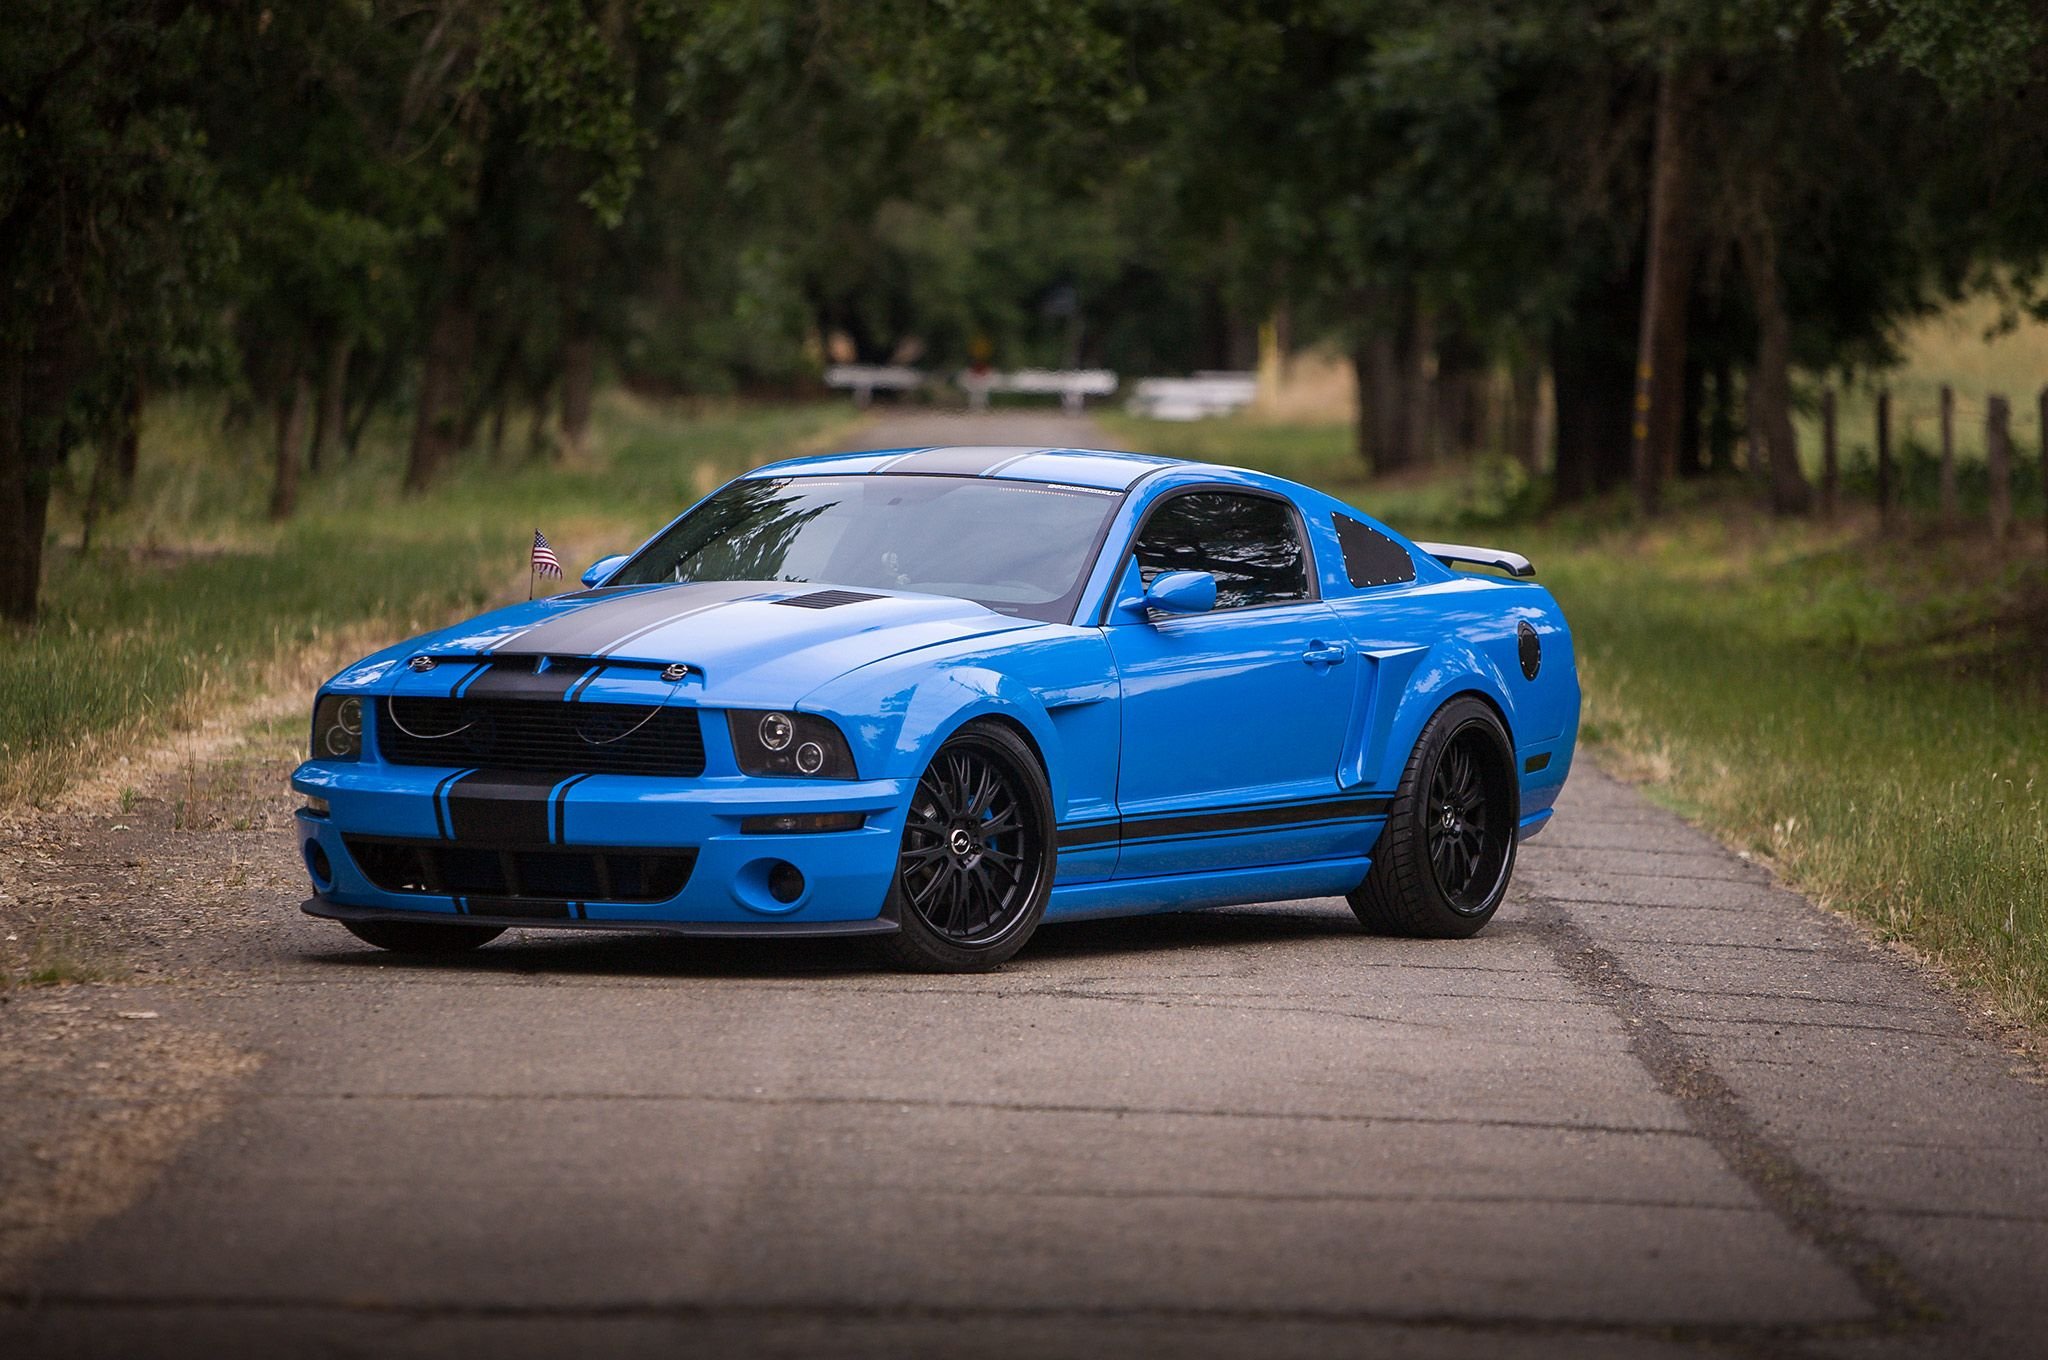 2005, Ford, Mustang, Shelby, Gt, Super, Street, Pro, Touring, Supercar, Usa,  31 Wallpaper